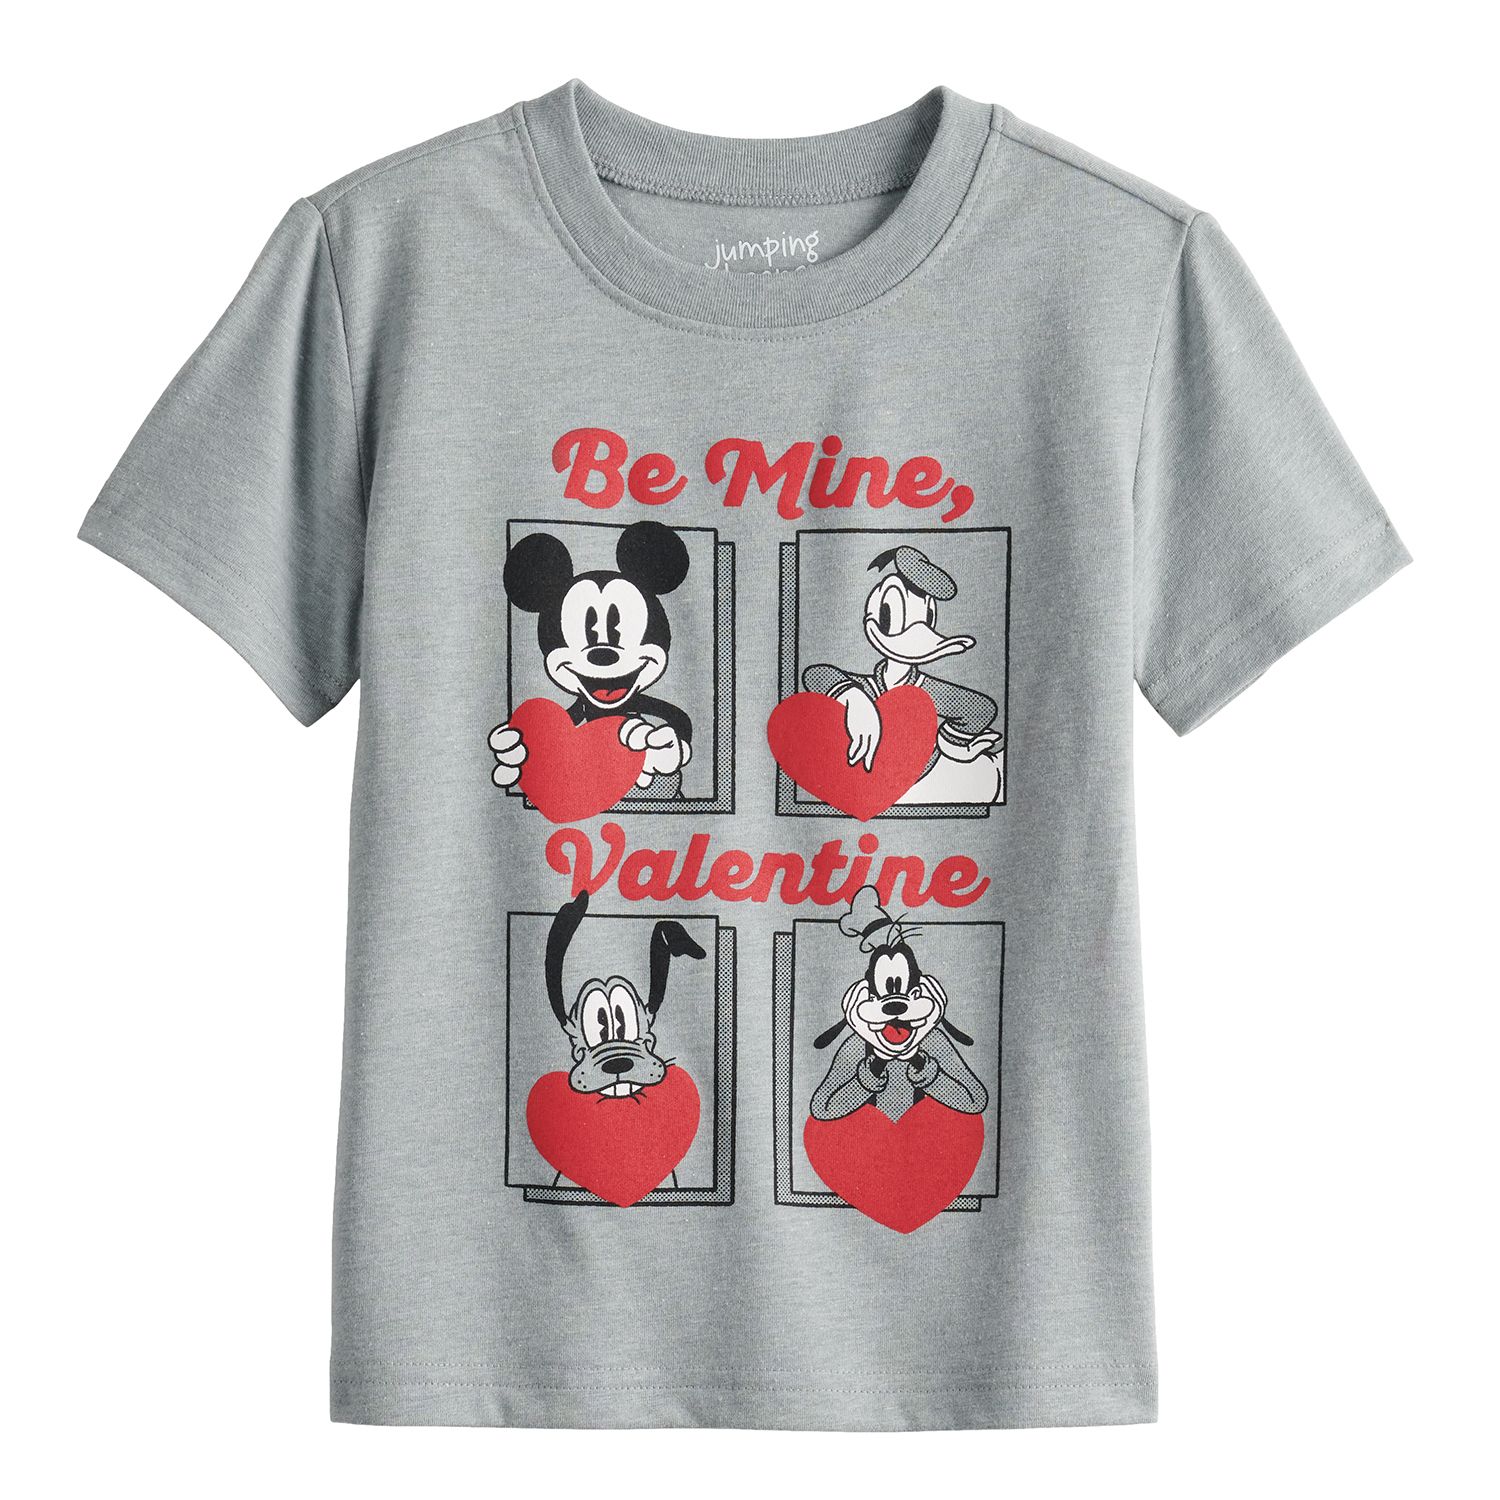 Image for Disney/Jumping Beans Disney's Mickey Mouse & Friends Toddler Boy "Be Mine" Graphic Tee by Jumping Beans® at Kohl's.